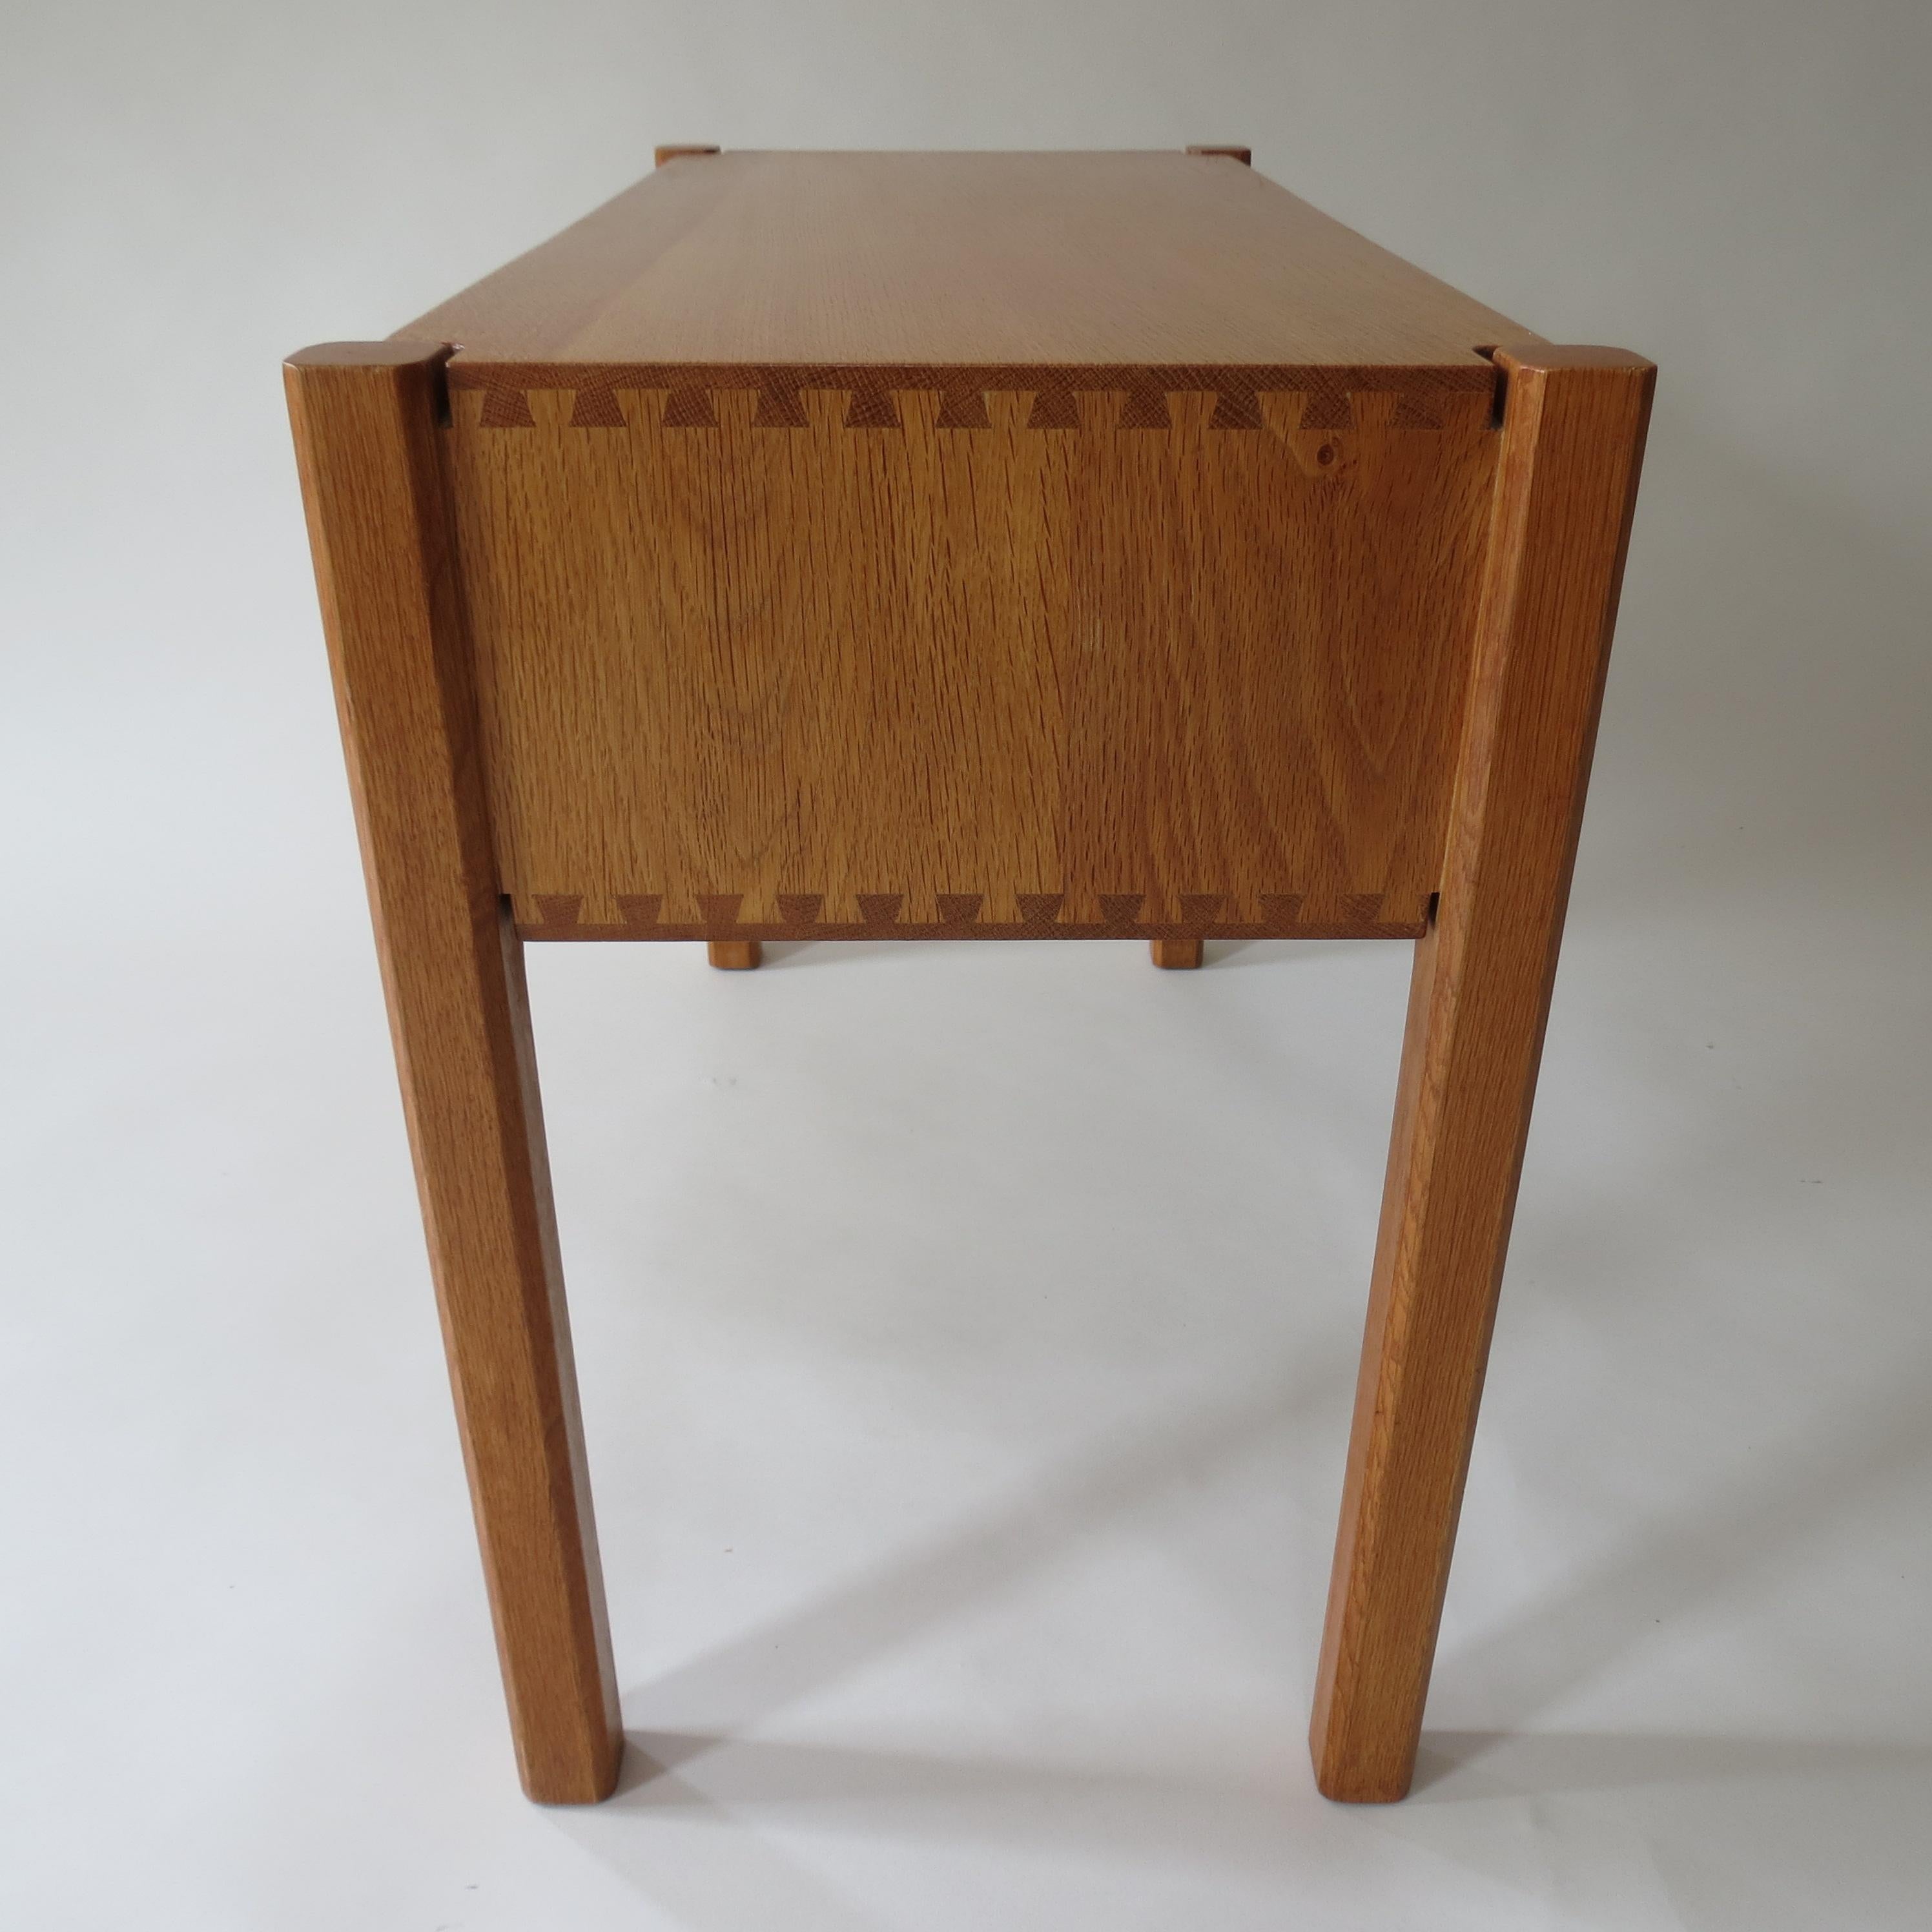 1960s Oak Arts Craft Style Side Table Nightstand Hand Produced by Paul Litton  1